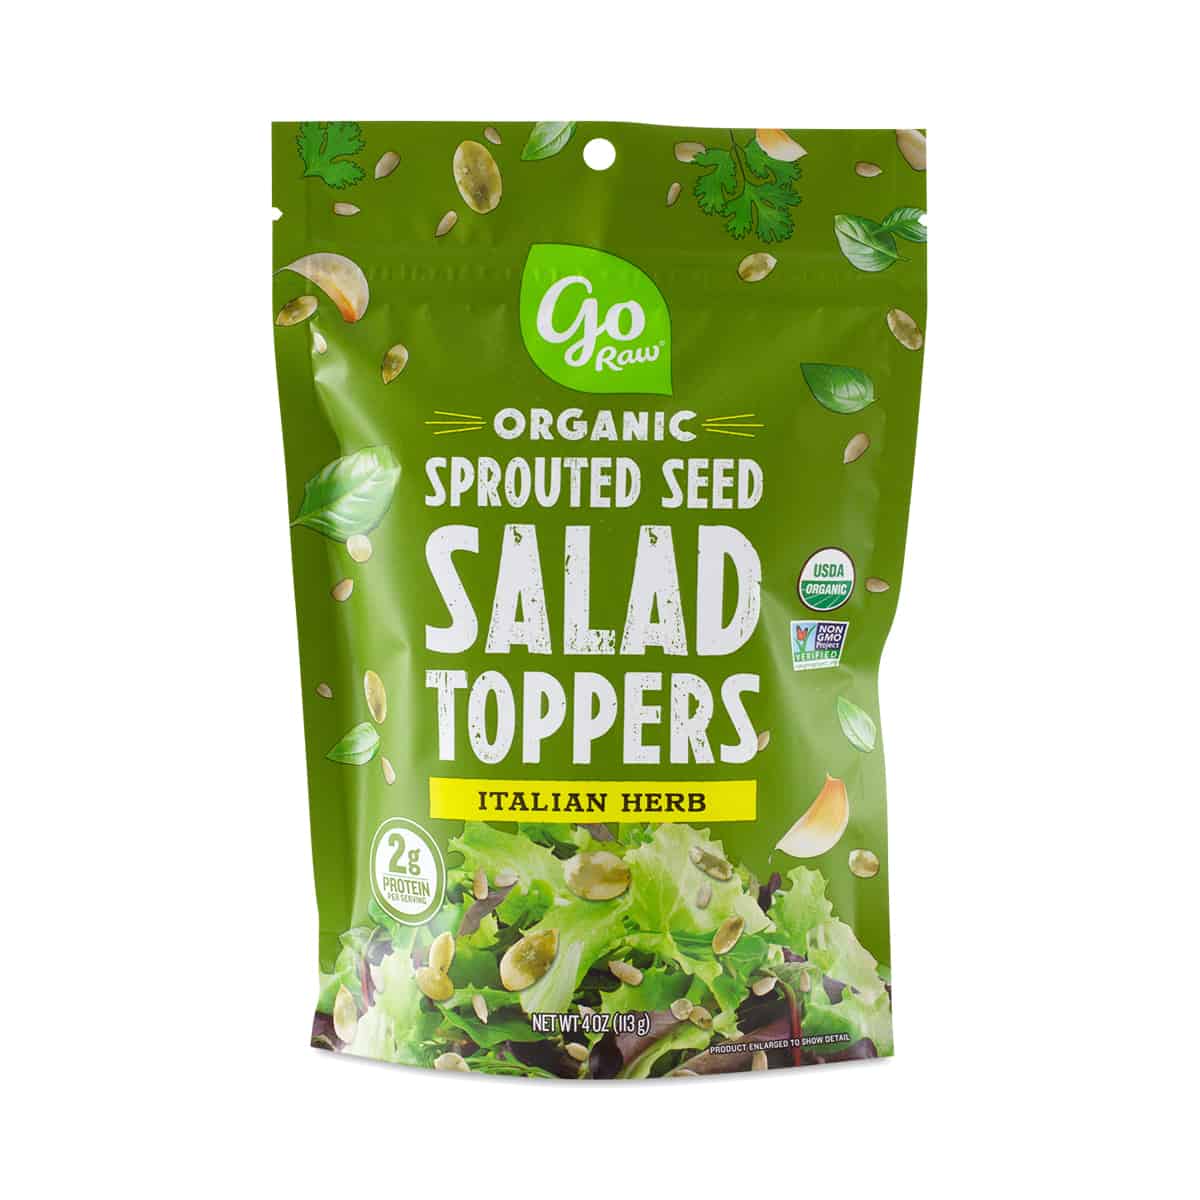 Salad toppers.